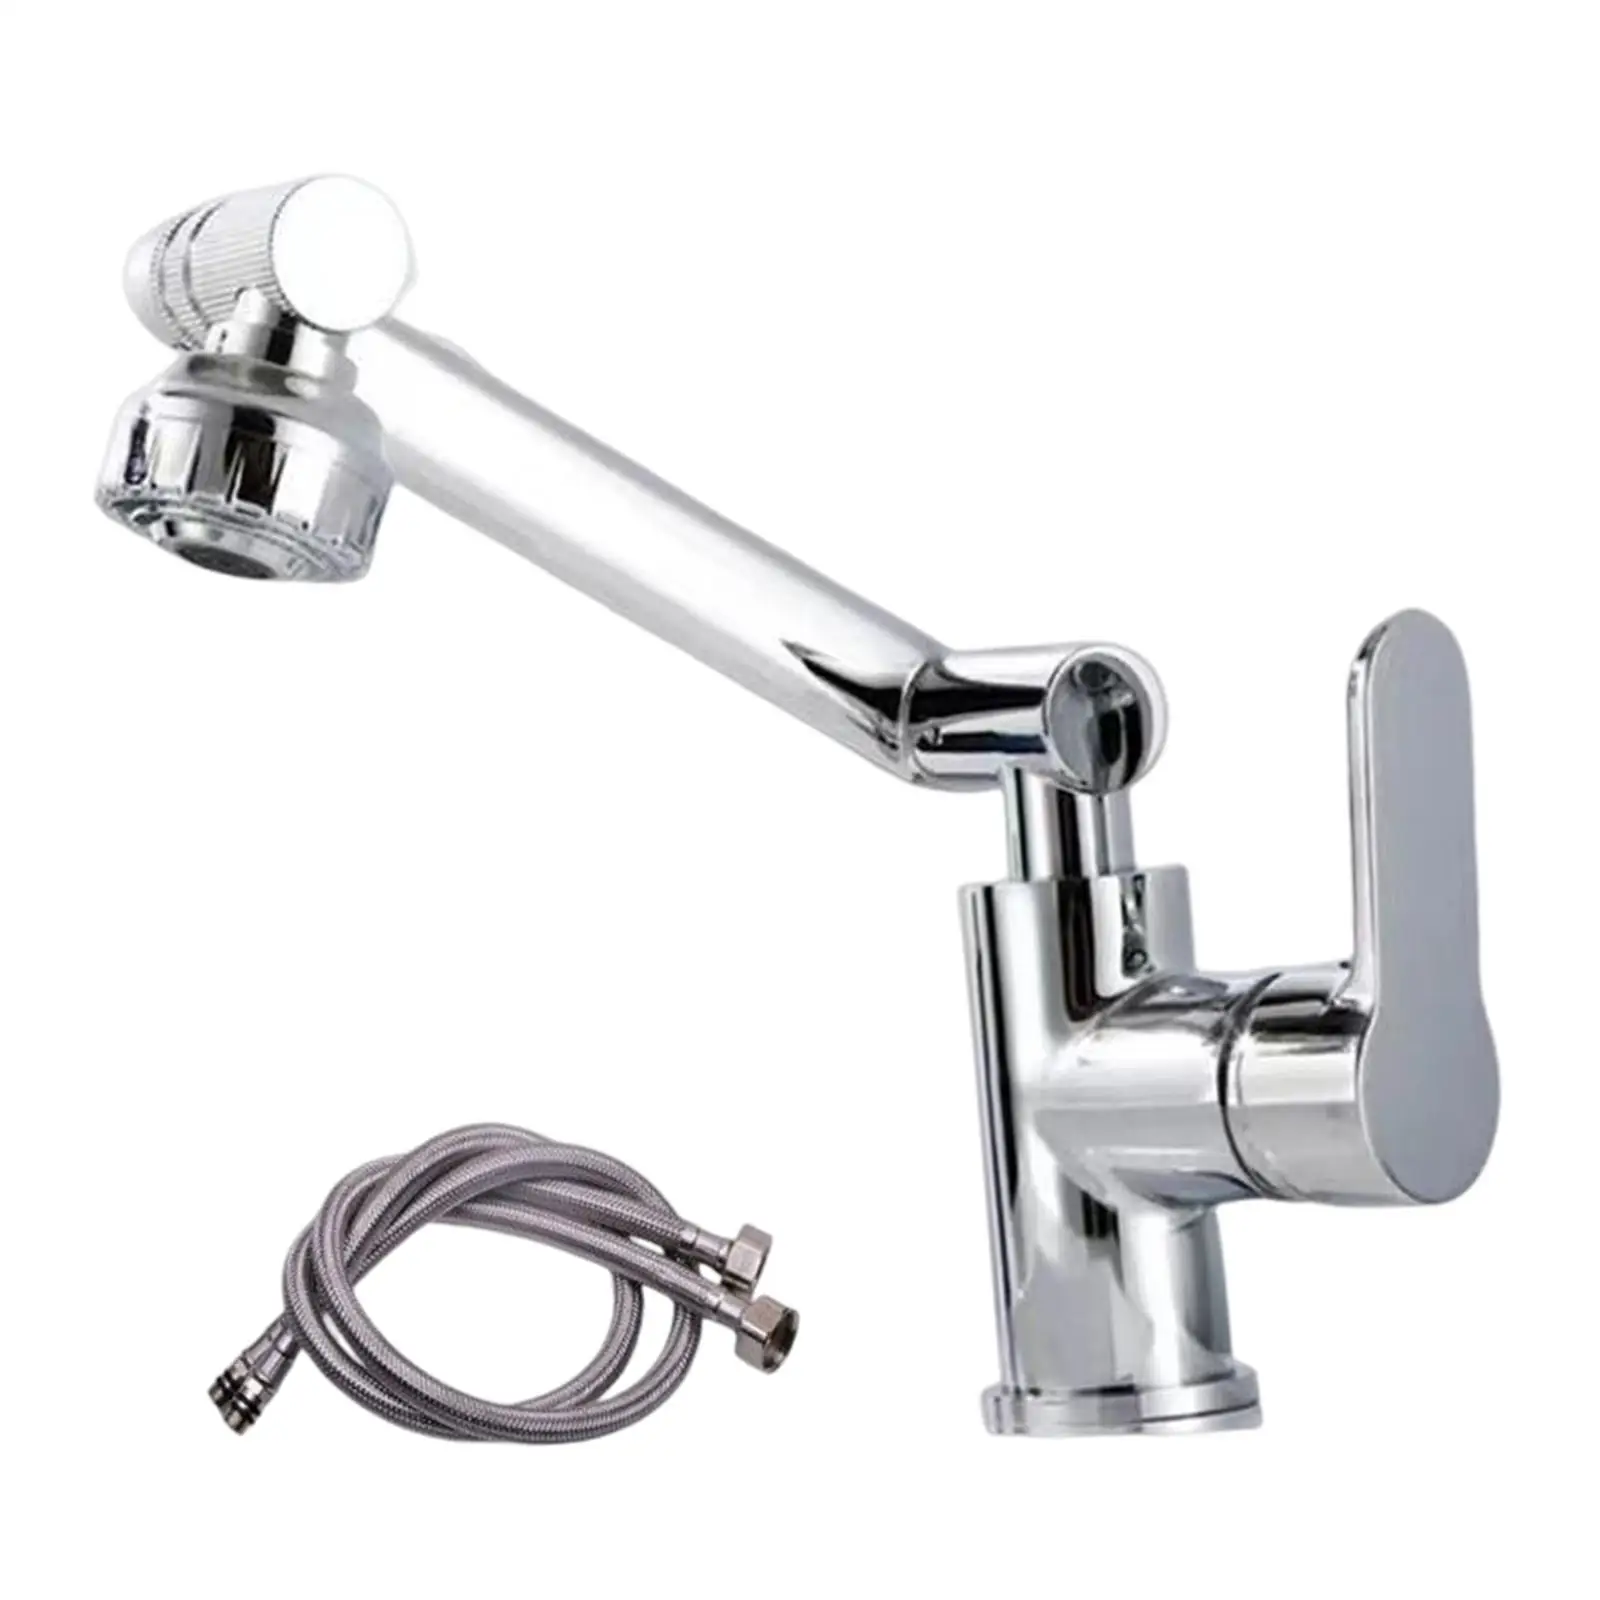 Bathroom Faucet Basin Mixer Tap 360 Degree Rotary for Office Outdoor Sink